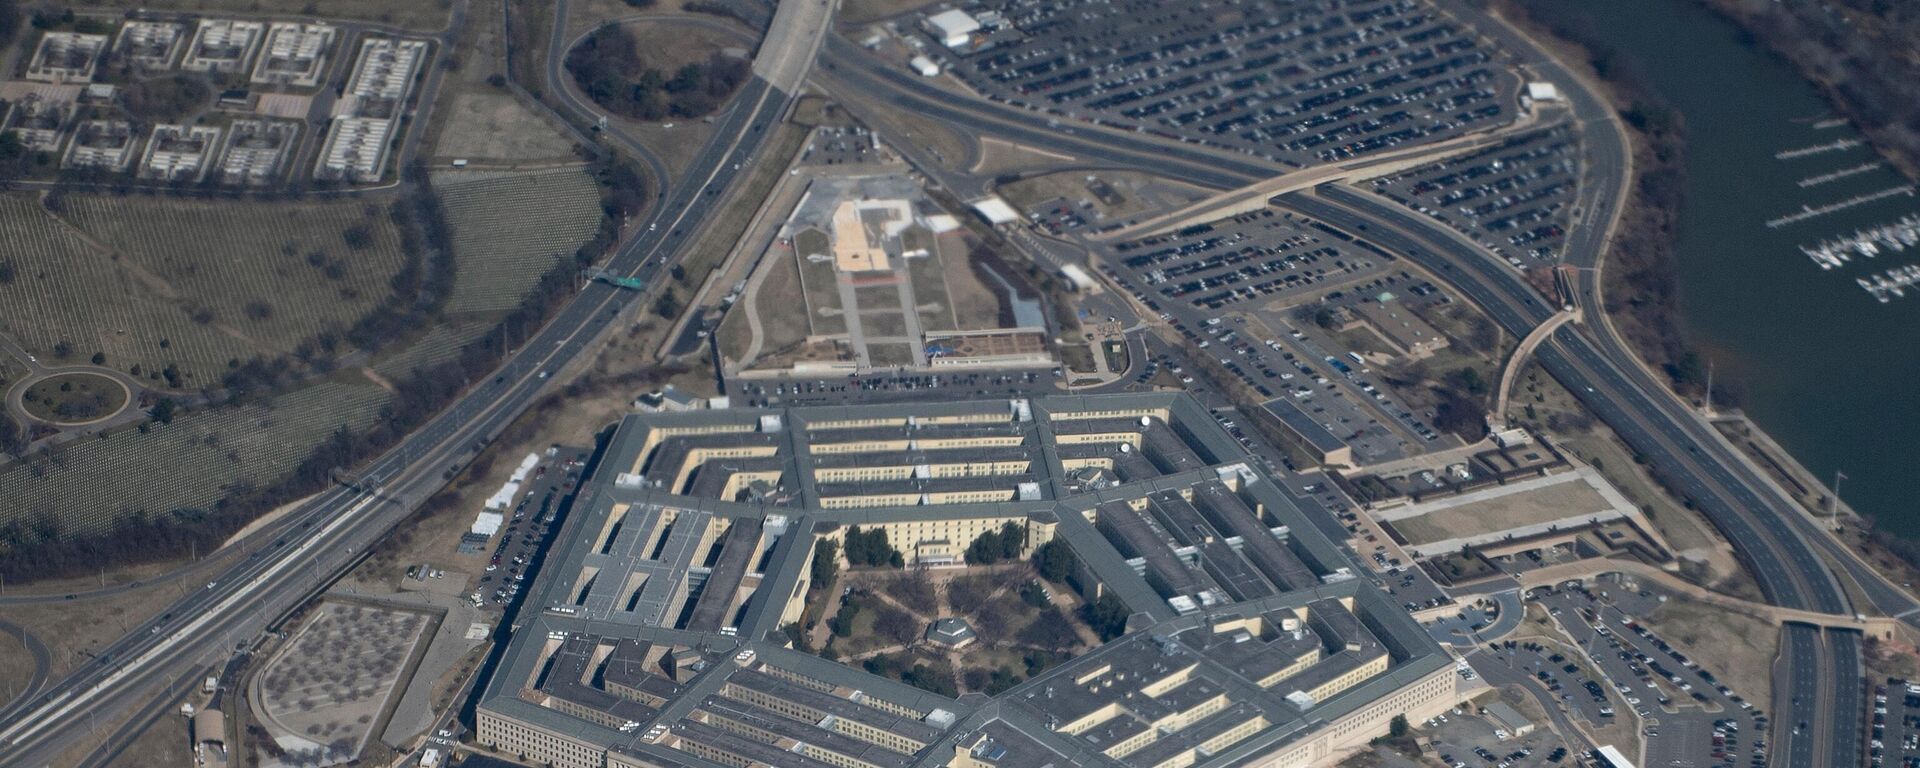 The Pentagon is seen from the air in Washington, DC, on March 2, 2022 - Sputnik International, 1920, 25.10.2023